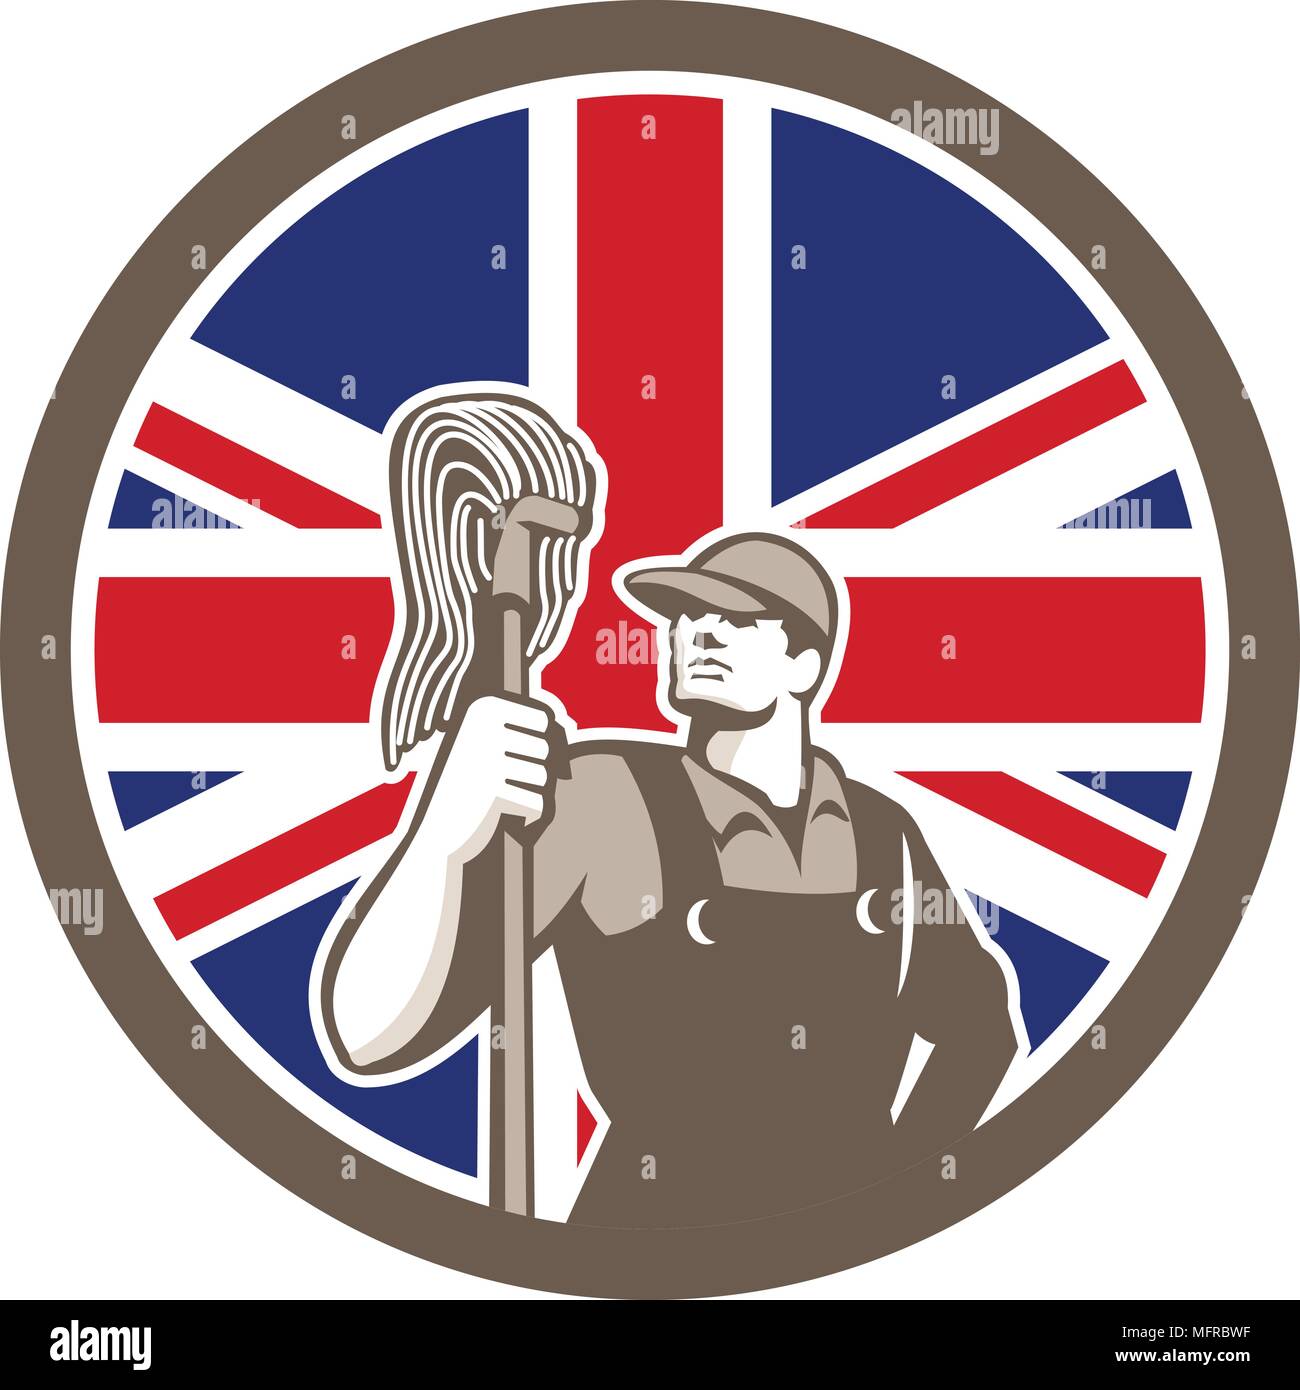 Icon retro style illustration of a British professional industrial cleaner or cleaning services worker holding mop with United Kingdom UK, Great Brita Stock Vector